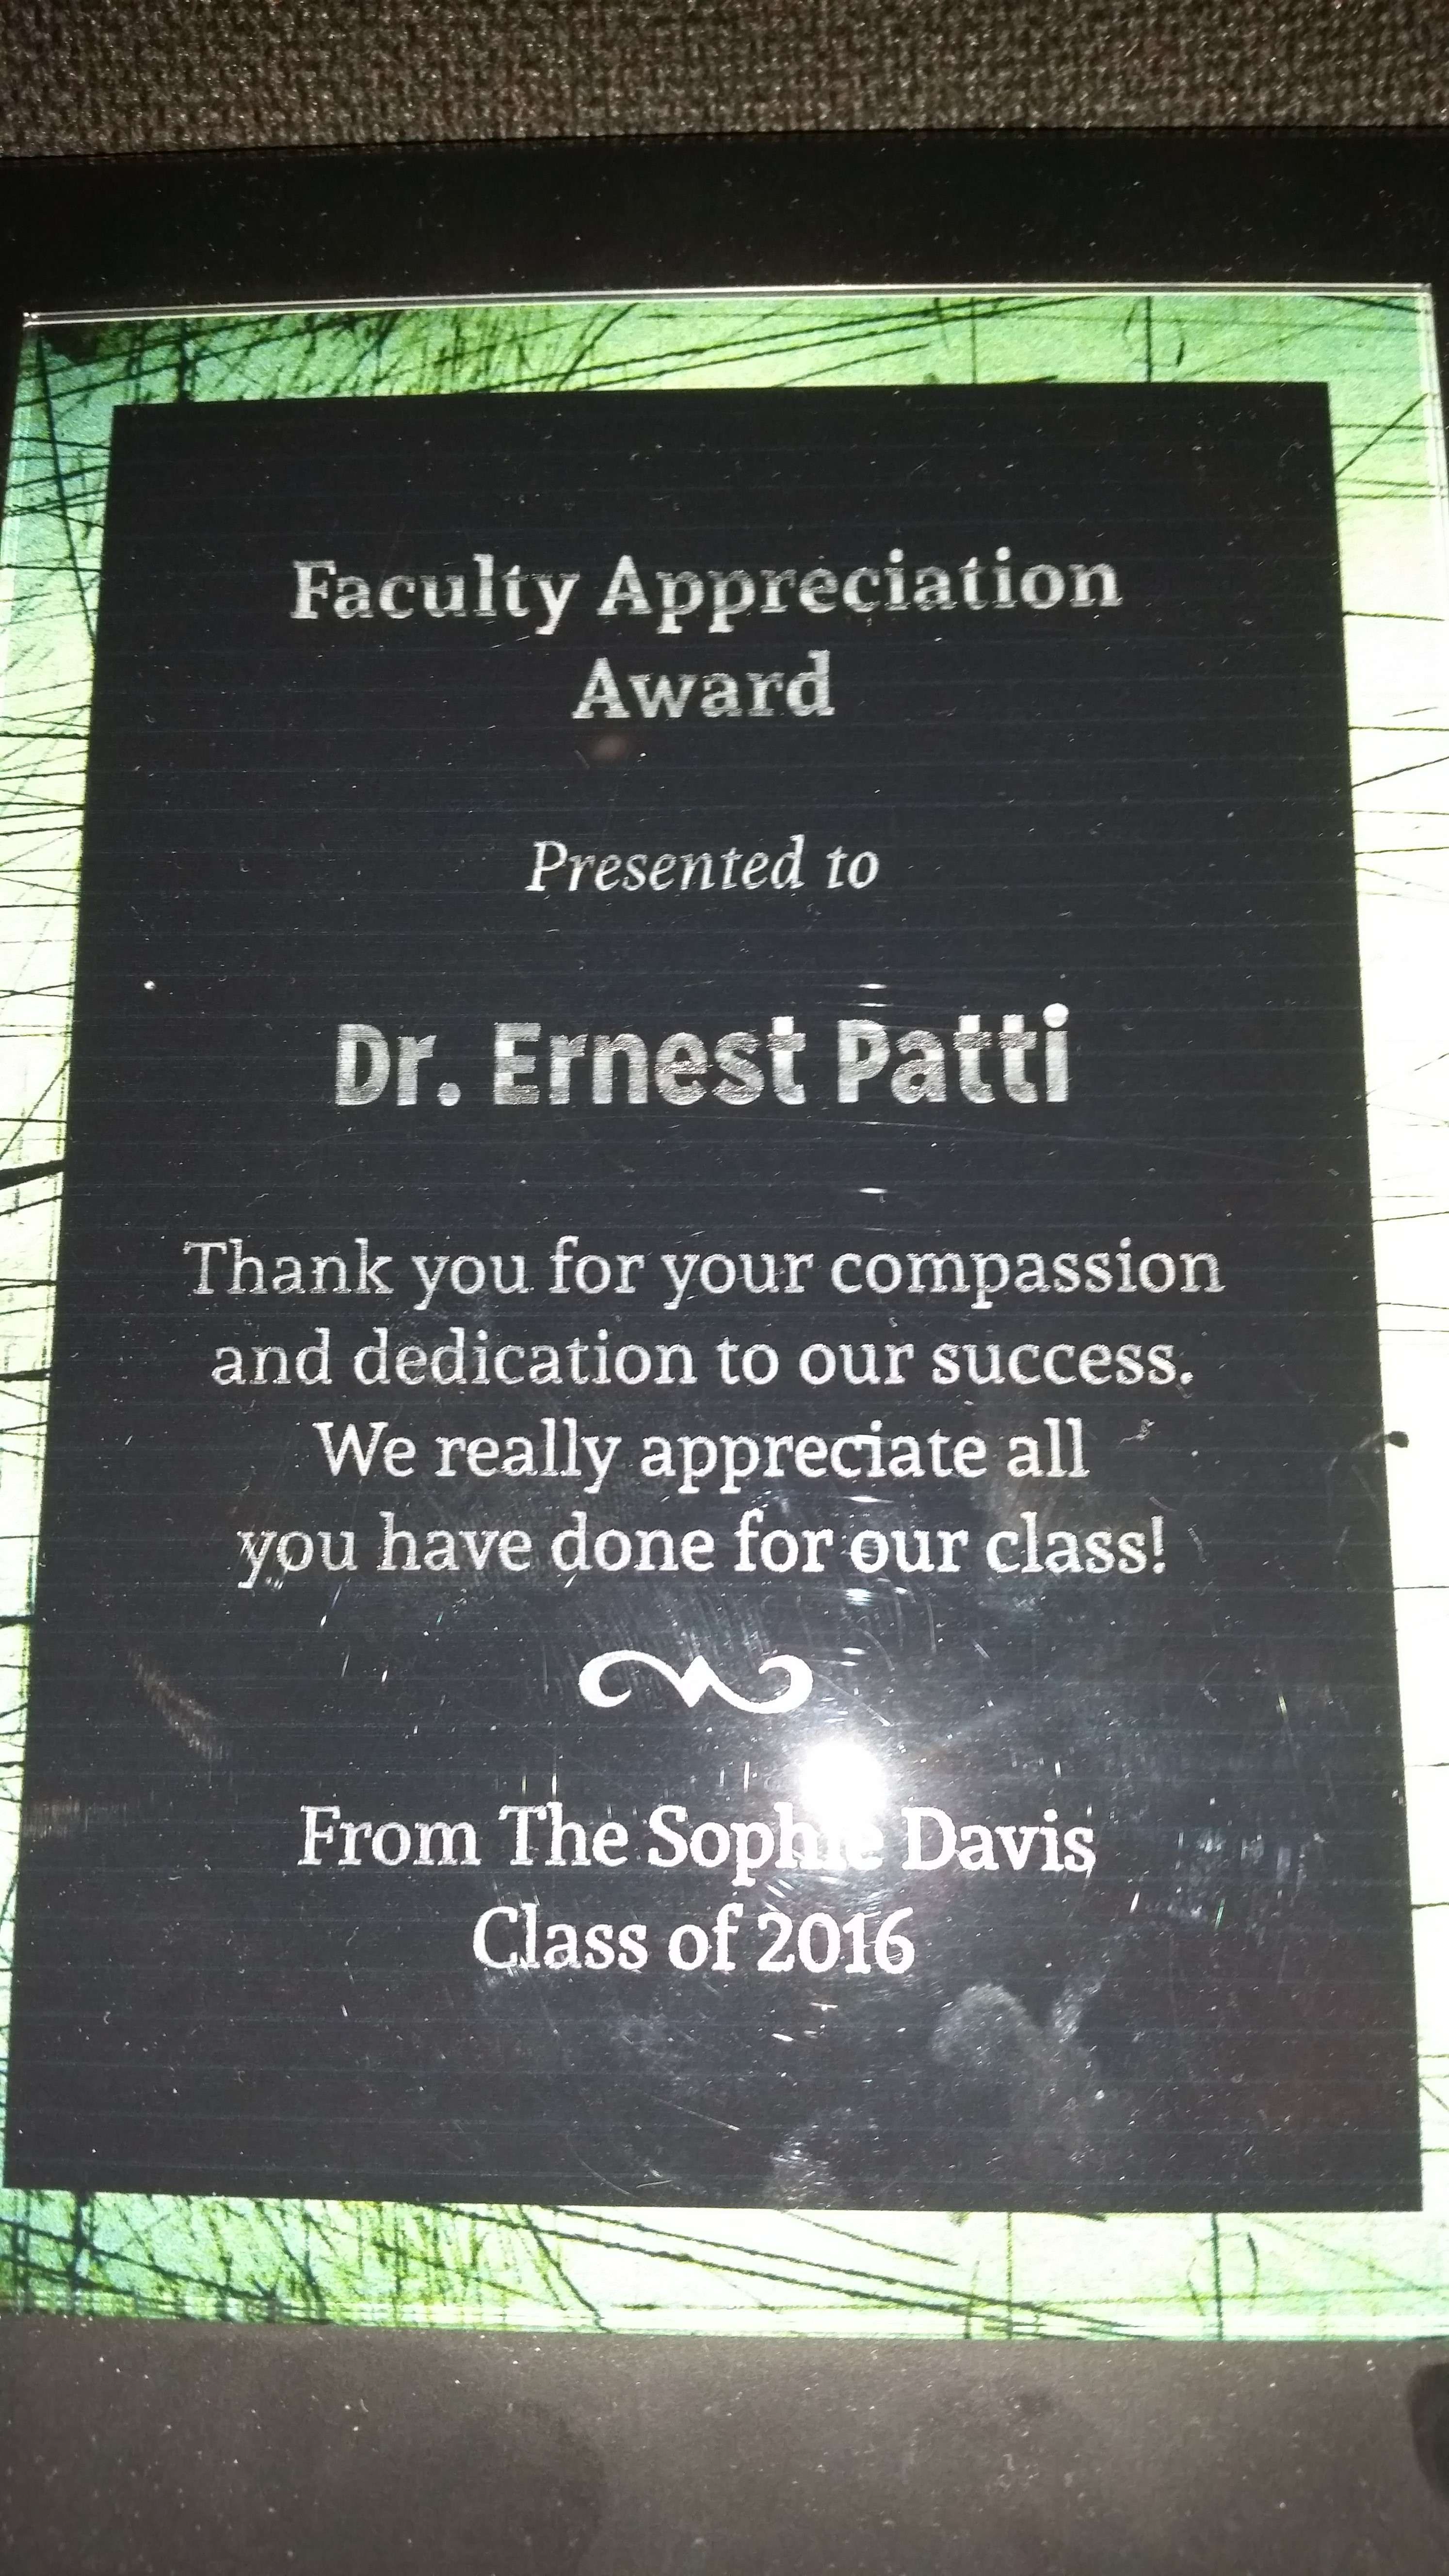 Image of Award given to Dr. Ernest Patti who was named Teacher of the Year